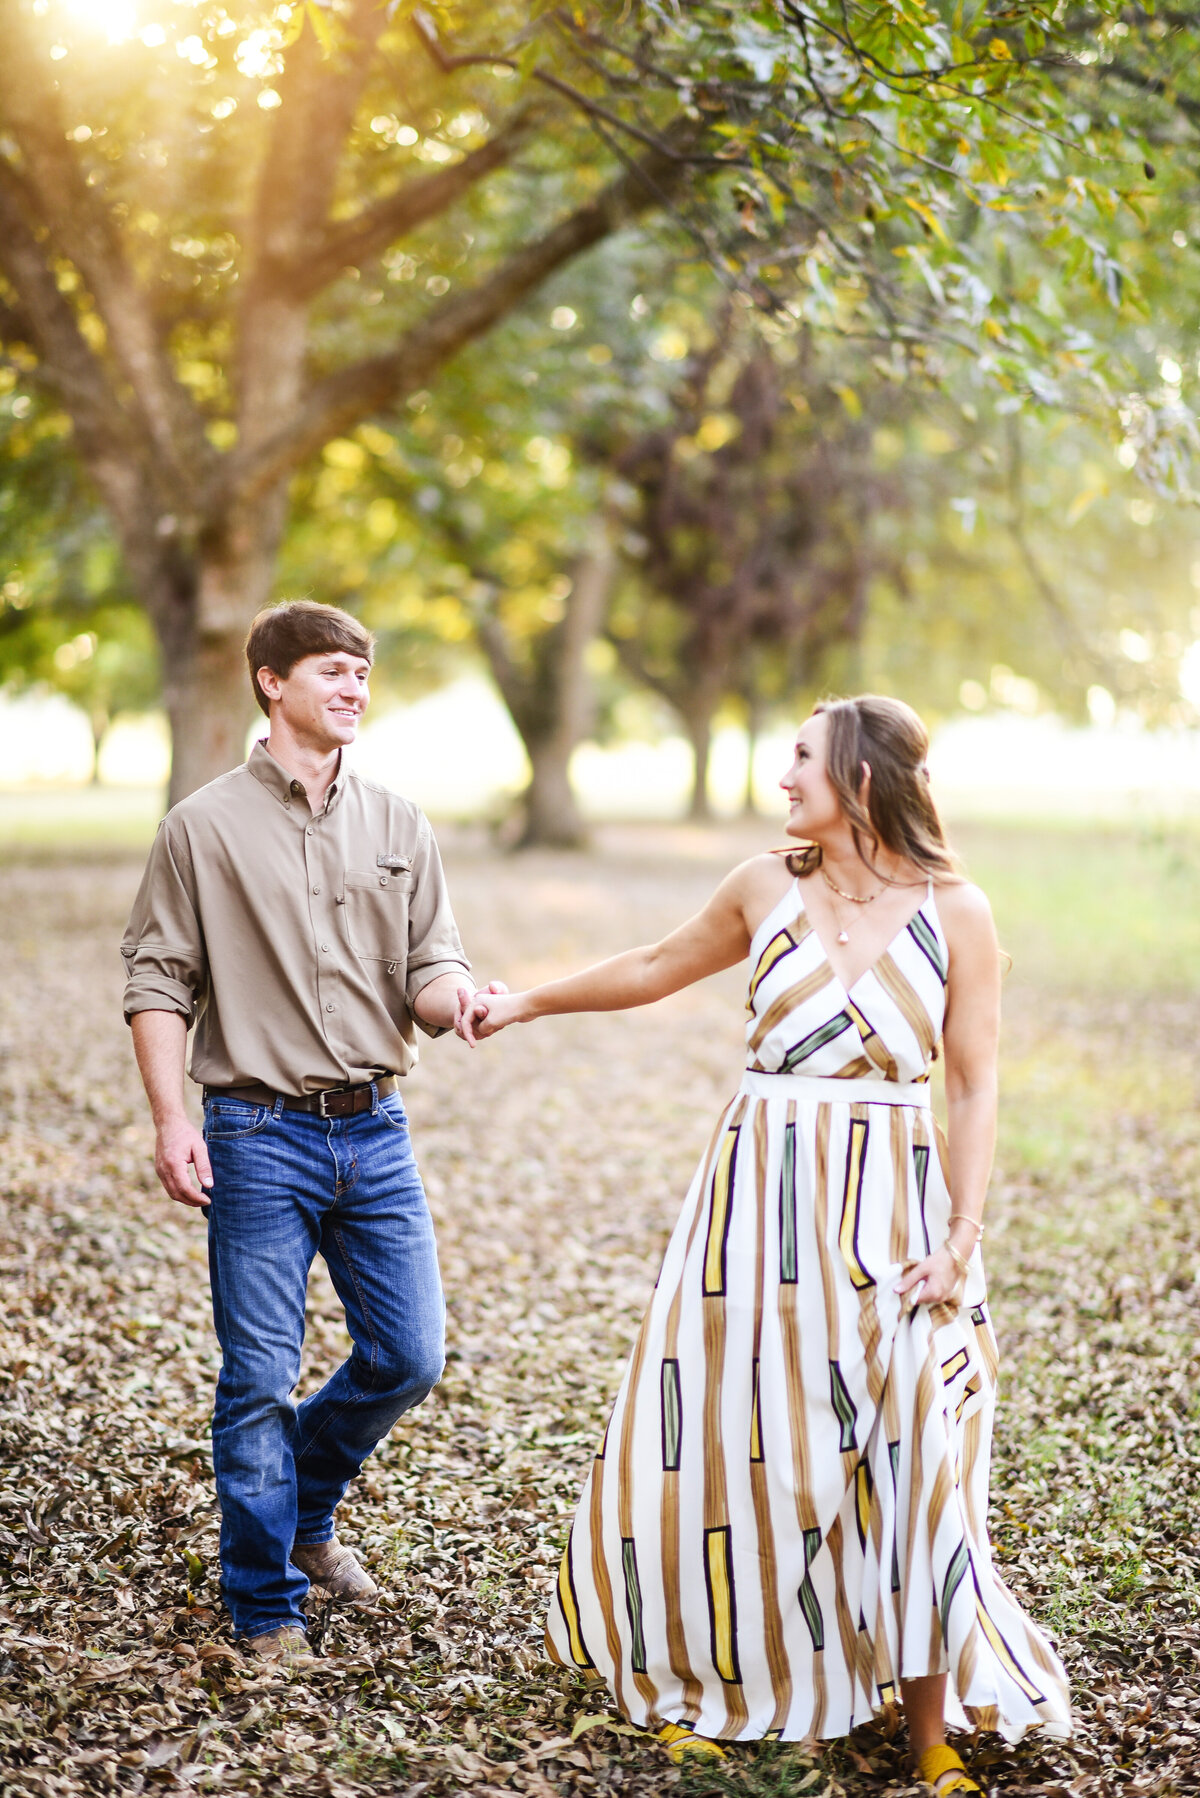 Beautiful Mississippi Engagement Photography: Couple walks hand-in-hand in a sunlit Mississippi delta pecan orchard